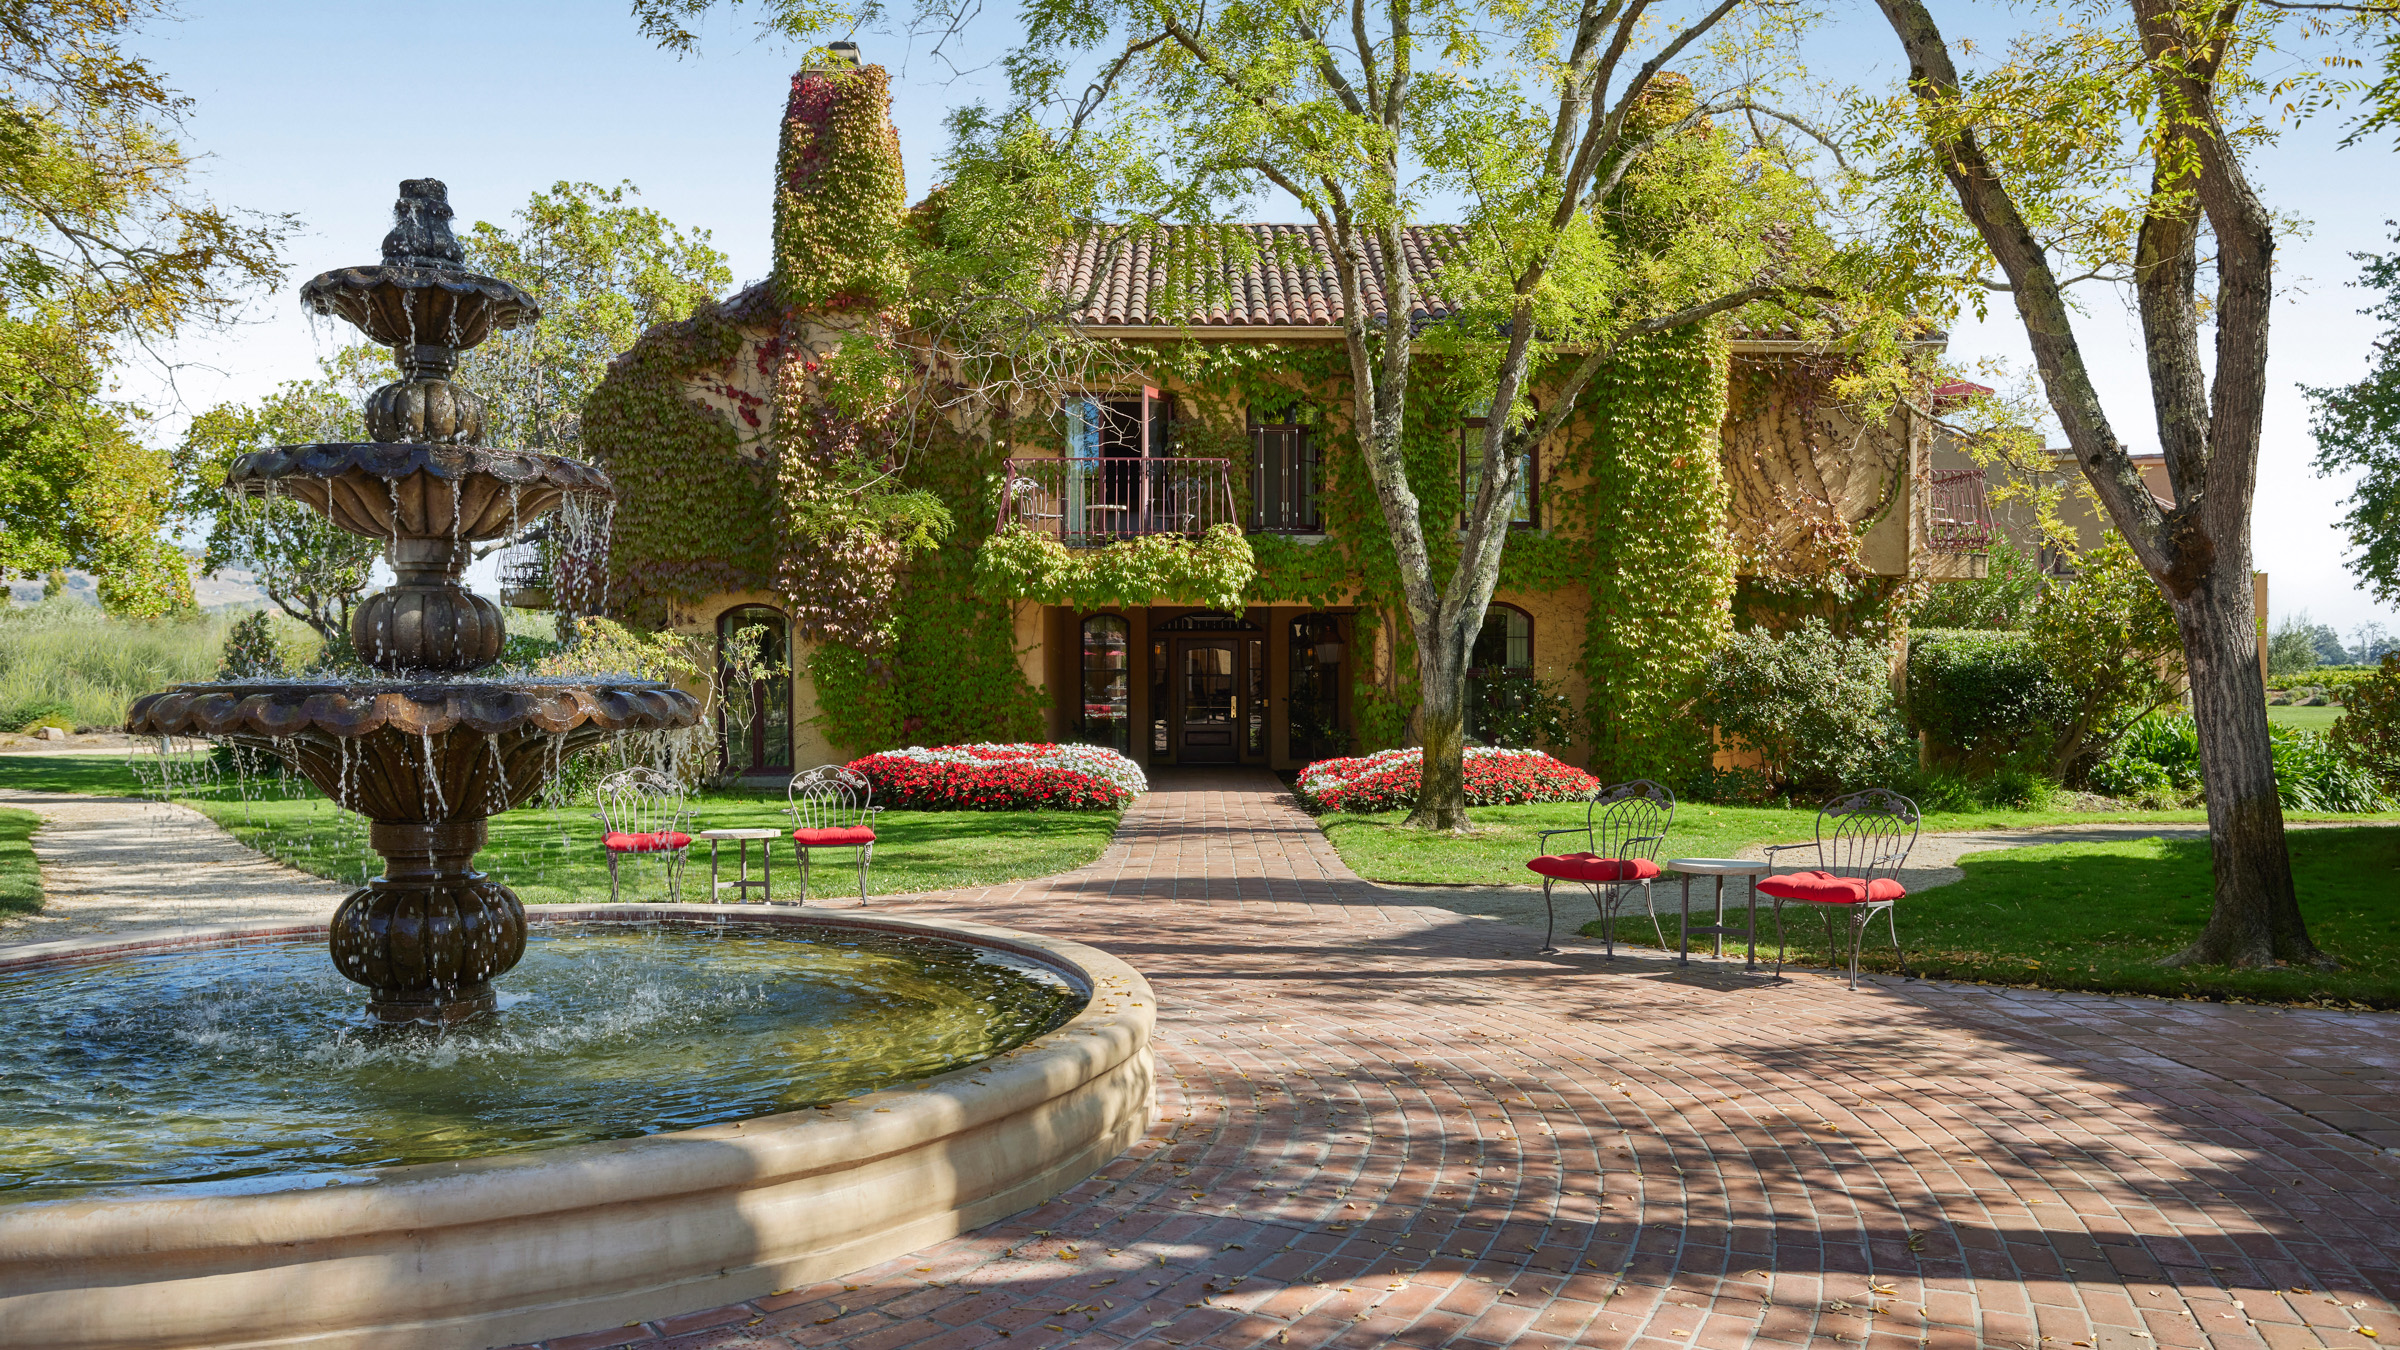 With climbing vines, an intimate and charming two-story guest accommodation at Vintners Resort, overlooks the beautiful garden courtyard and fountain.